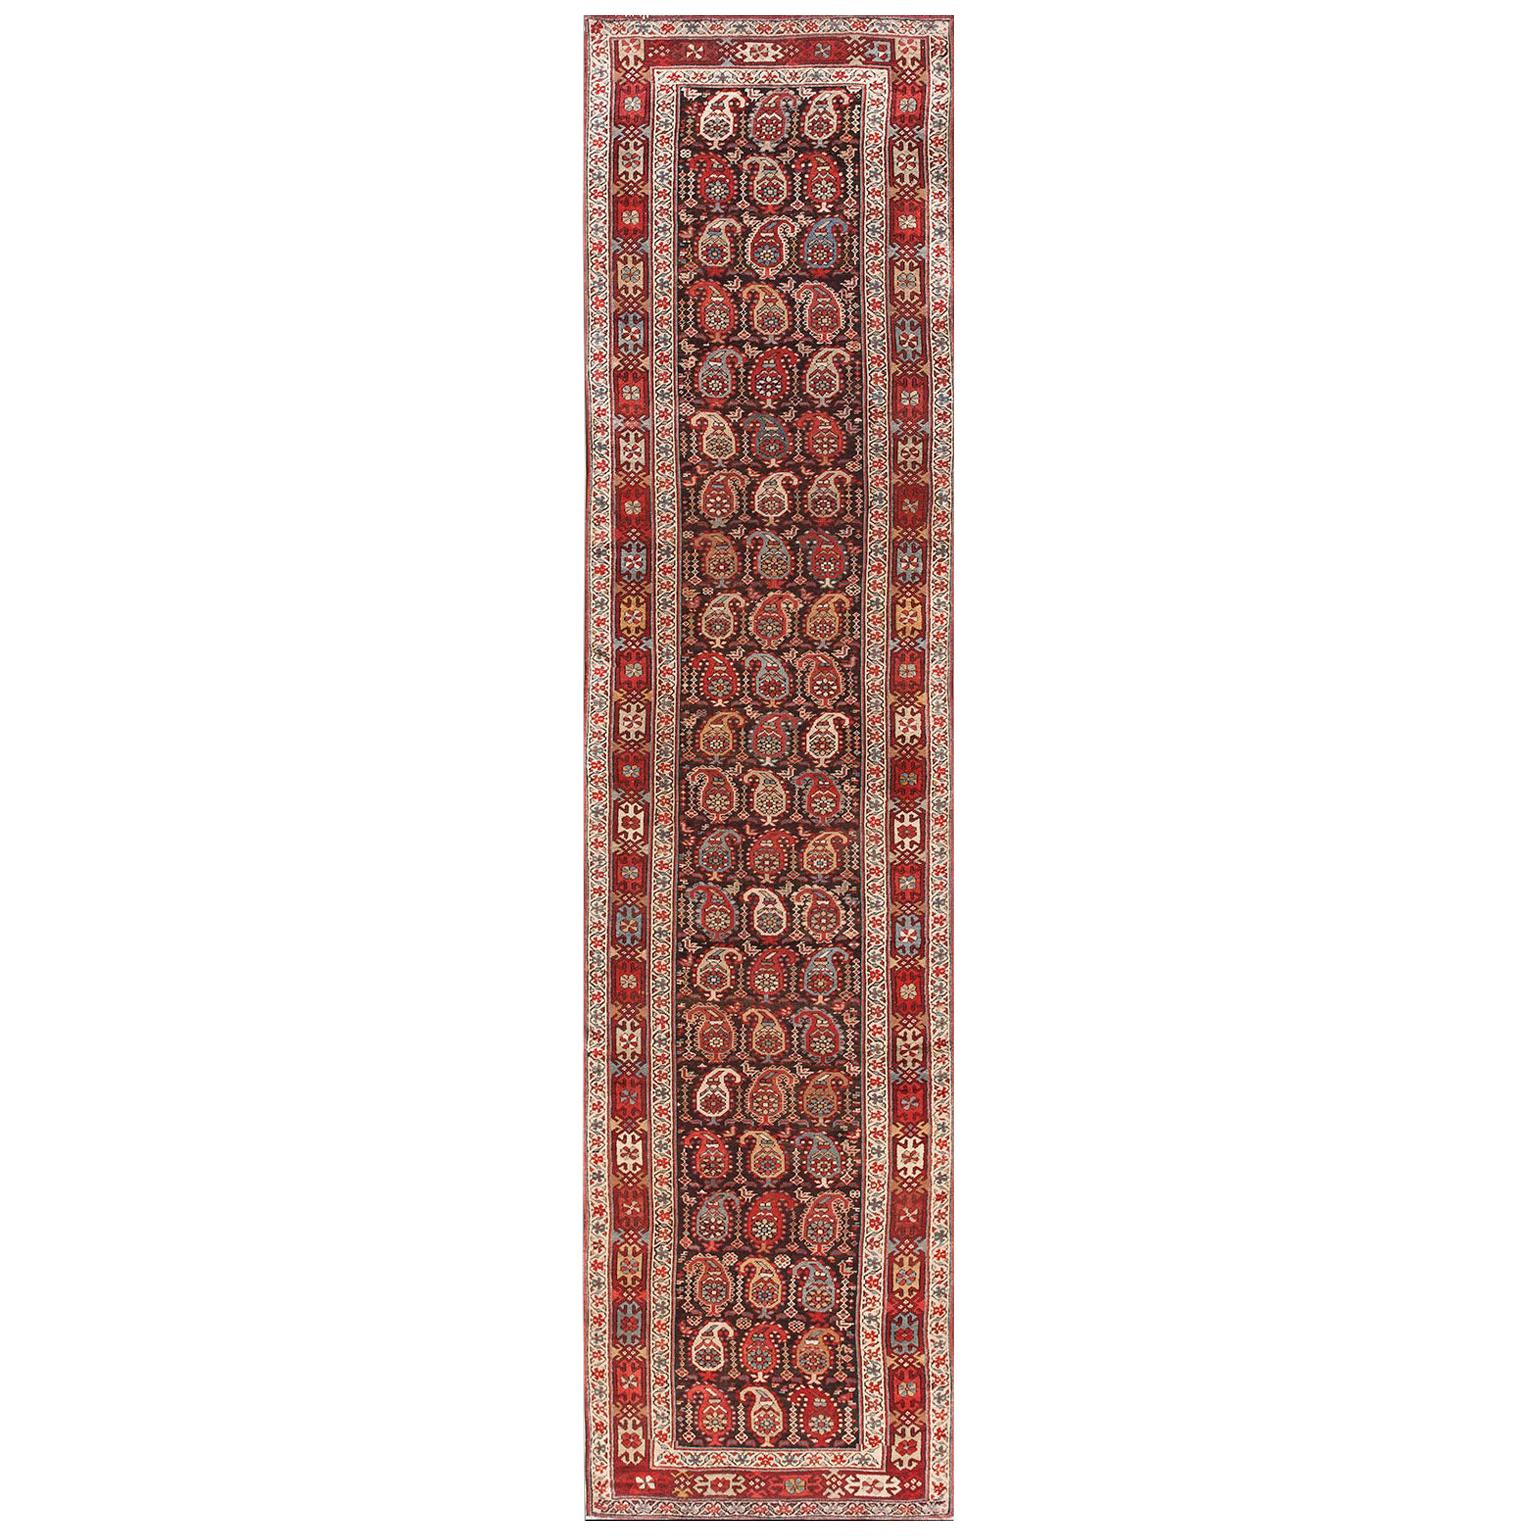 19th Century N.W. Persian Carpet ( 3'2" x 12'8" - 97 x 386 ) For Sale